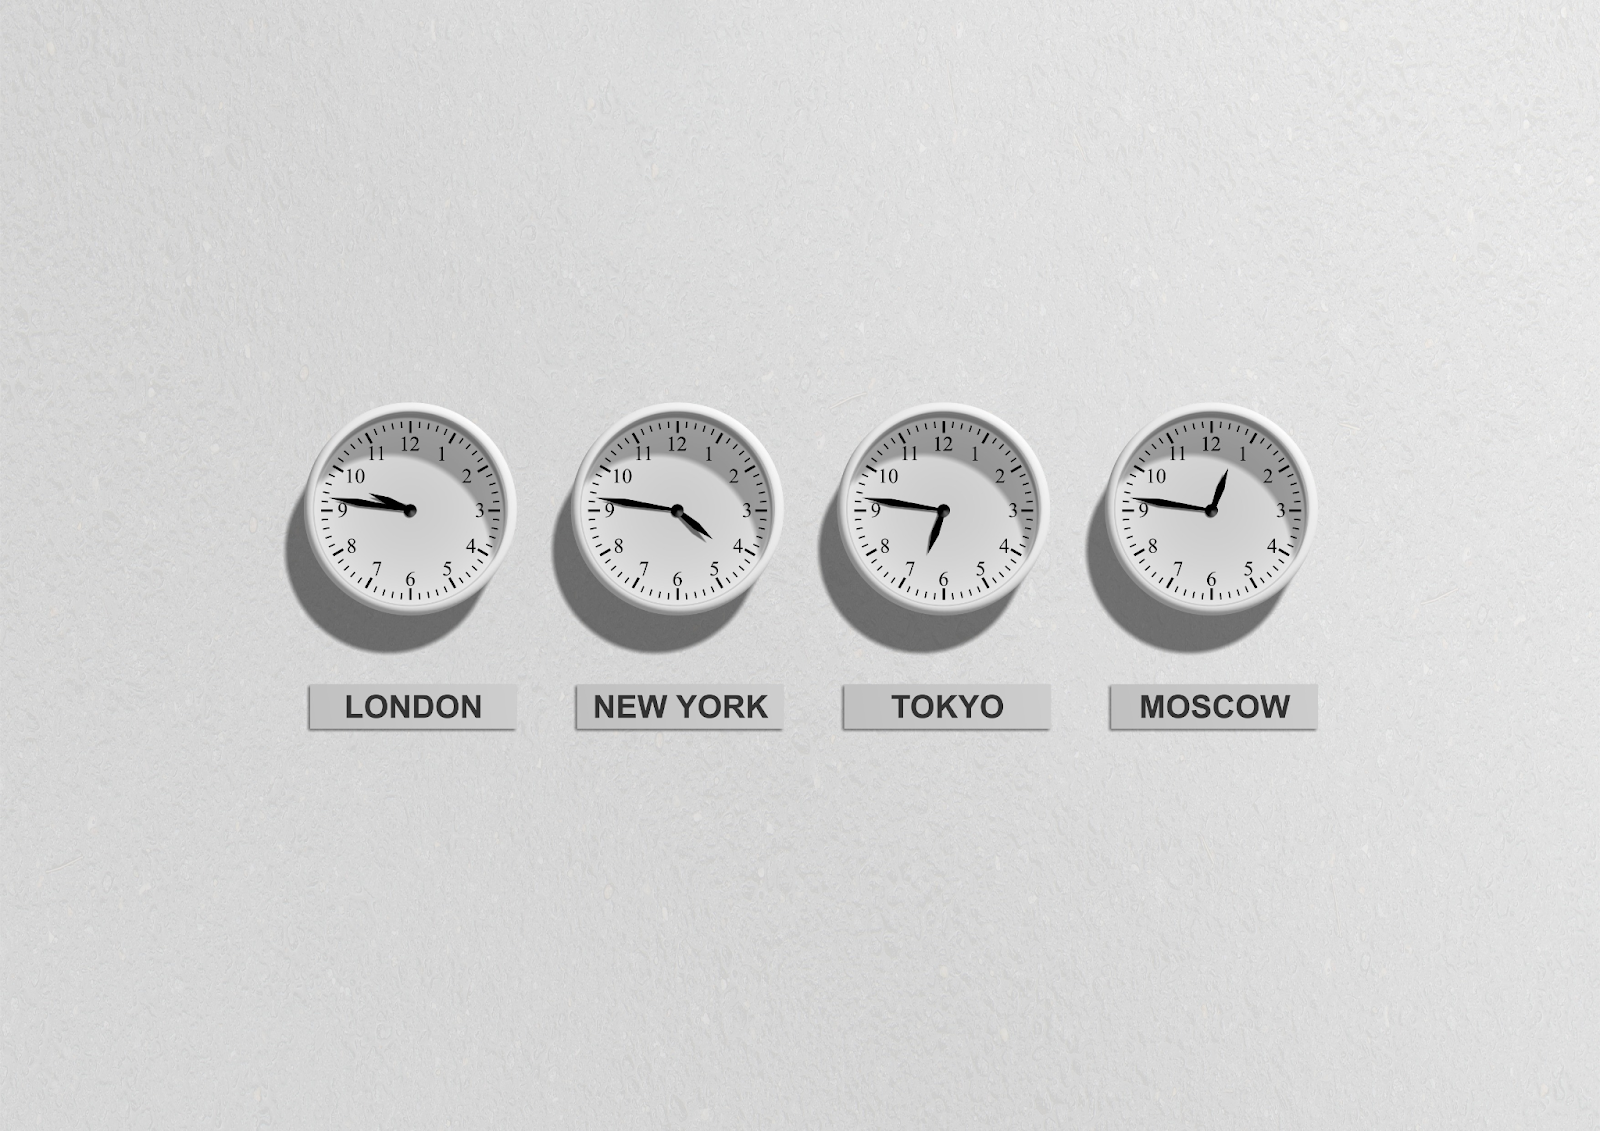 Different time zones represented by four clocks; one from london, one from new york, one from tokyo, and one from moscow